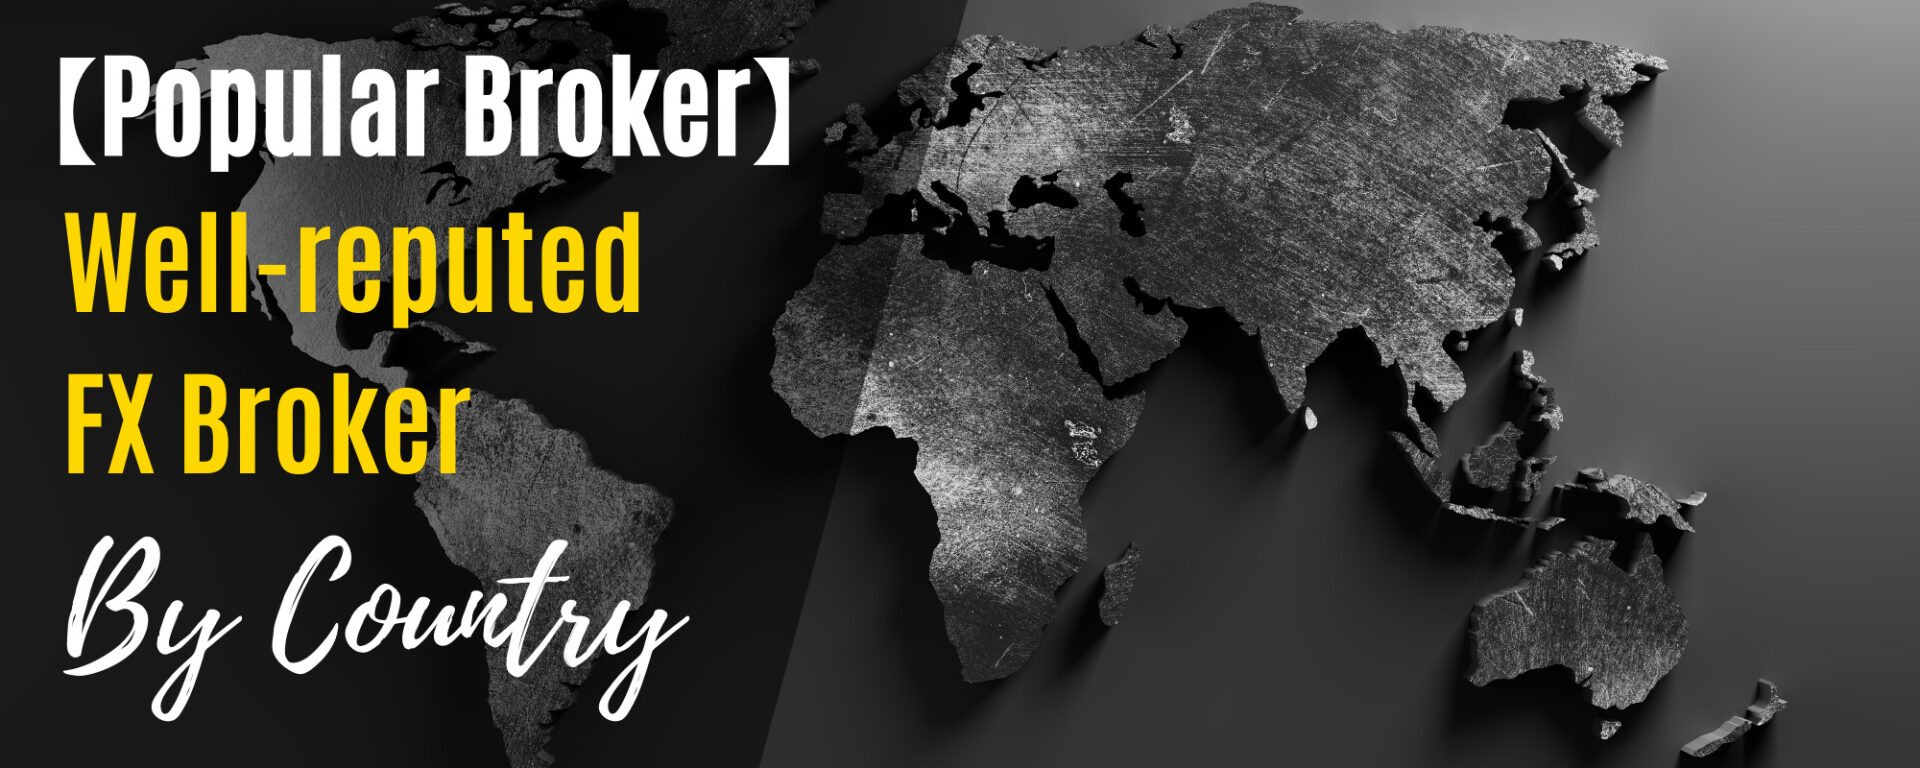 【Popular Broker】Well-reputed FX Broker by Country